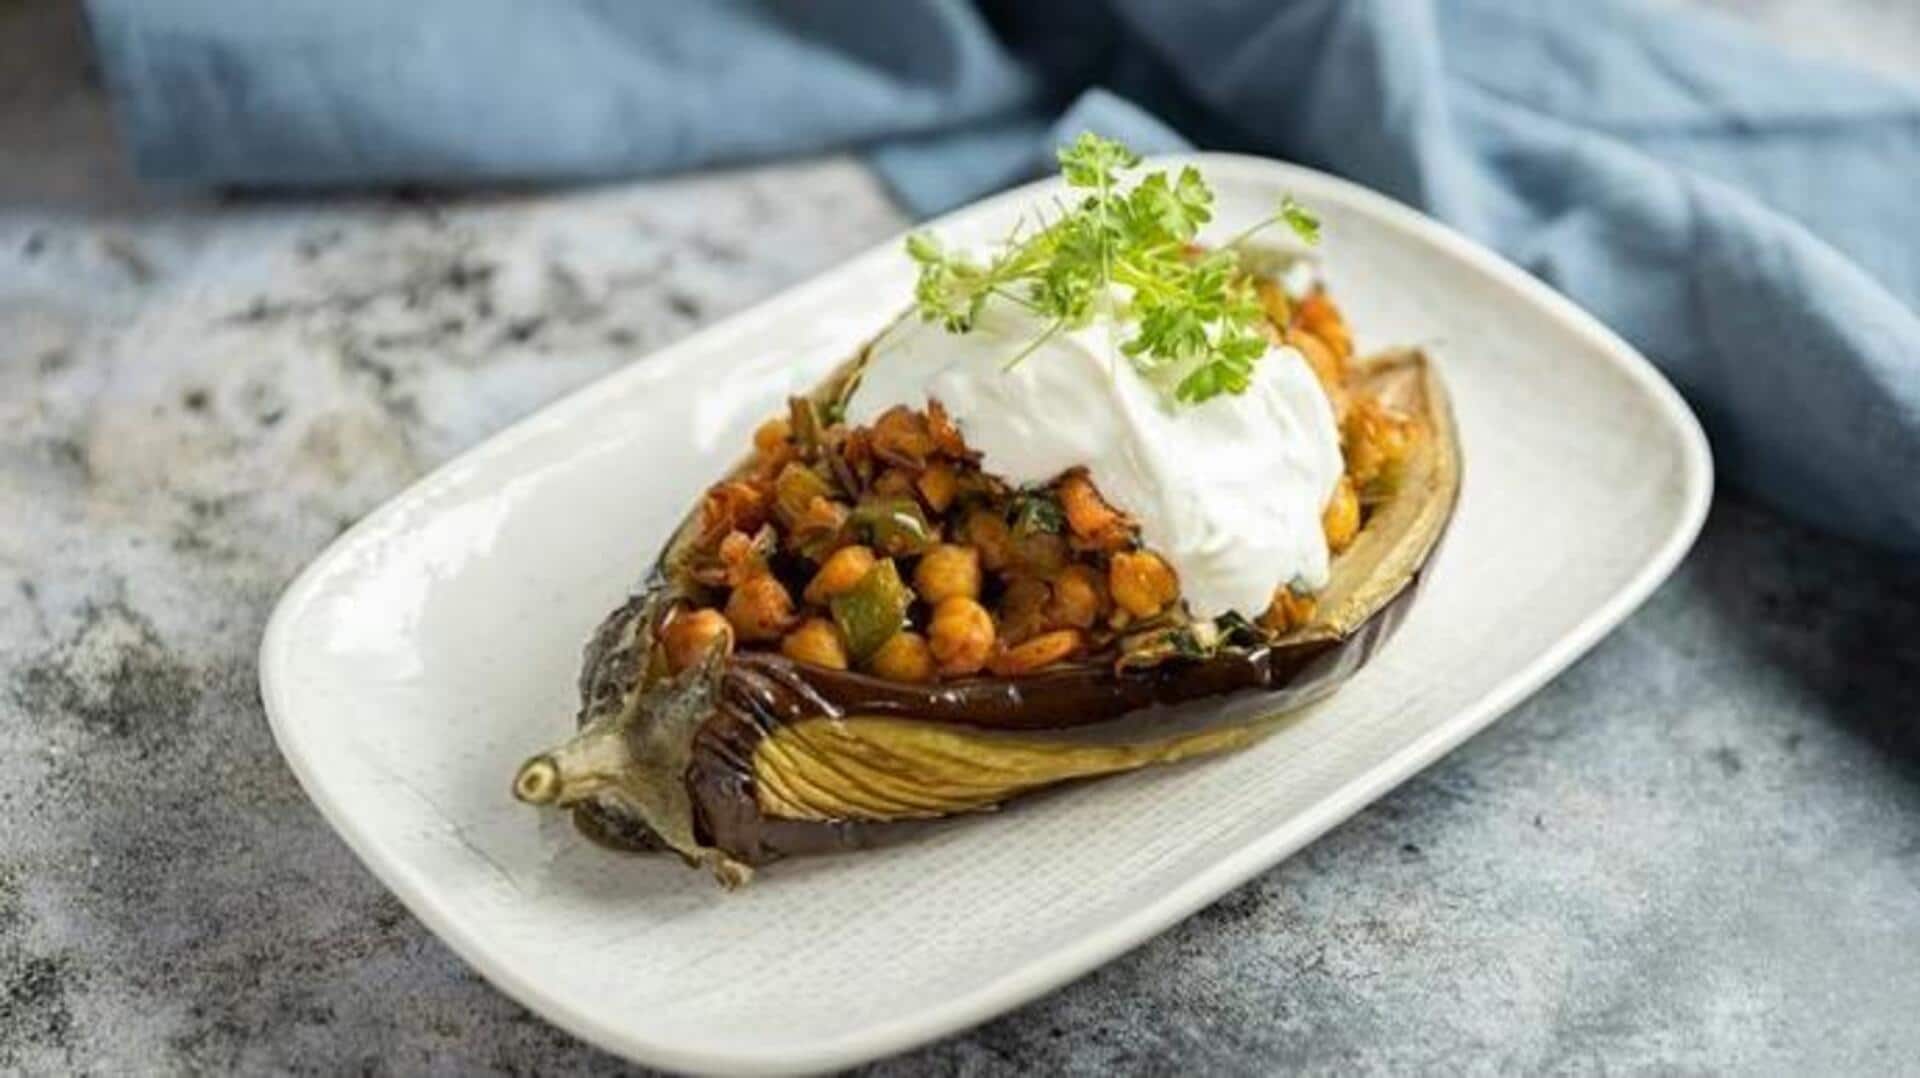 Check out this Mediterranean chickpea-stuffed eggplant recipe